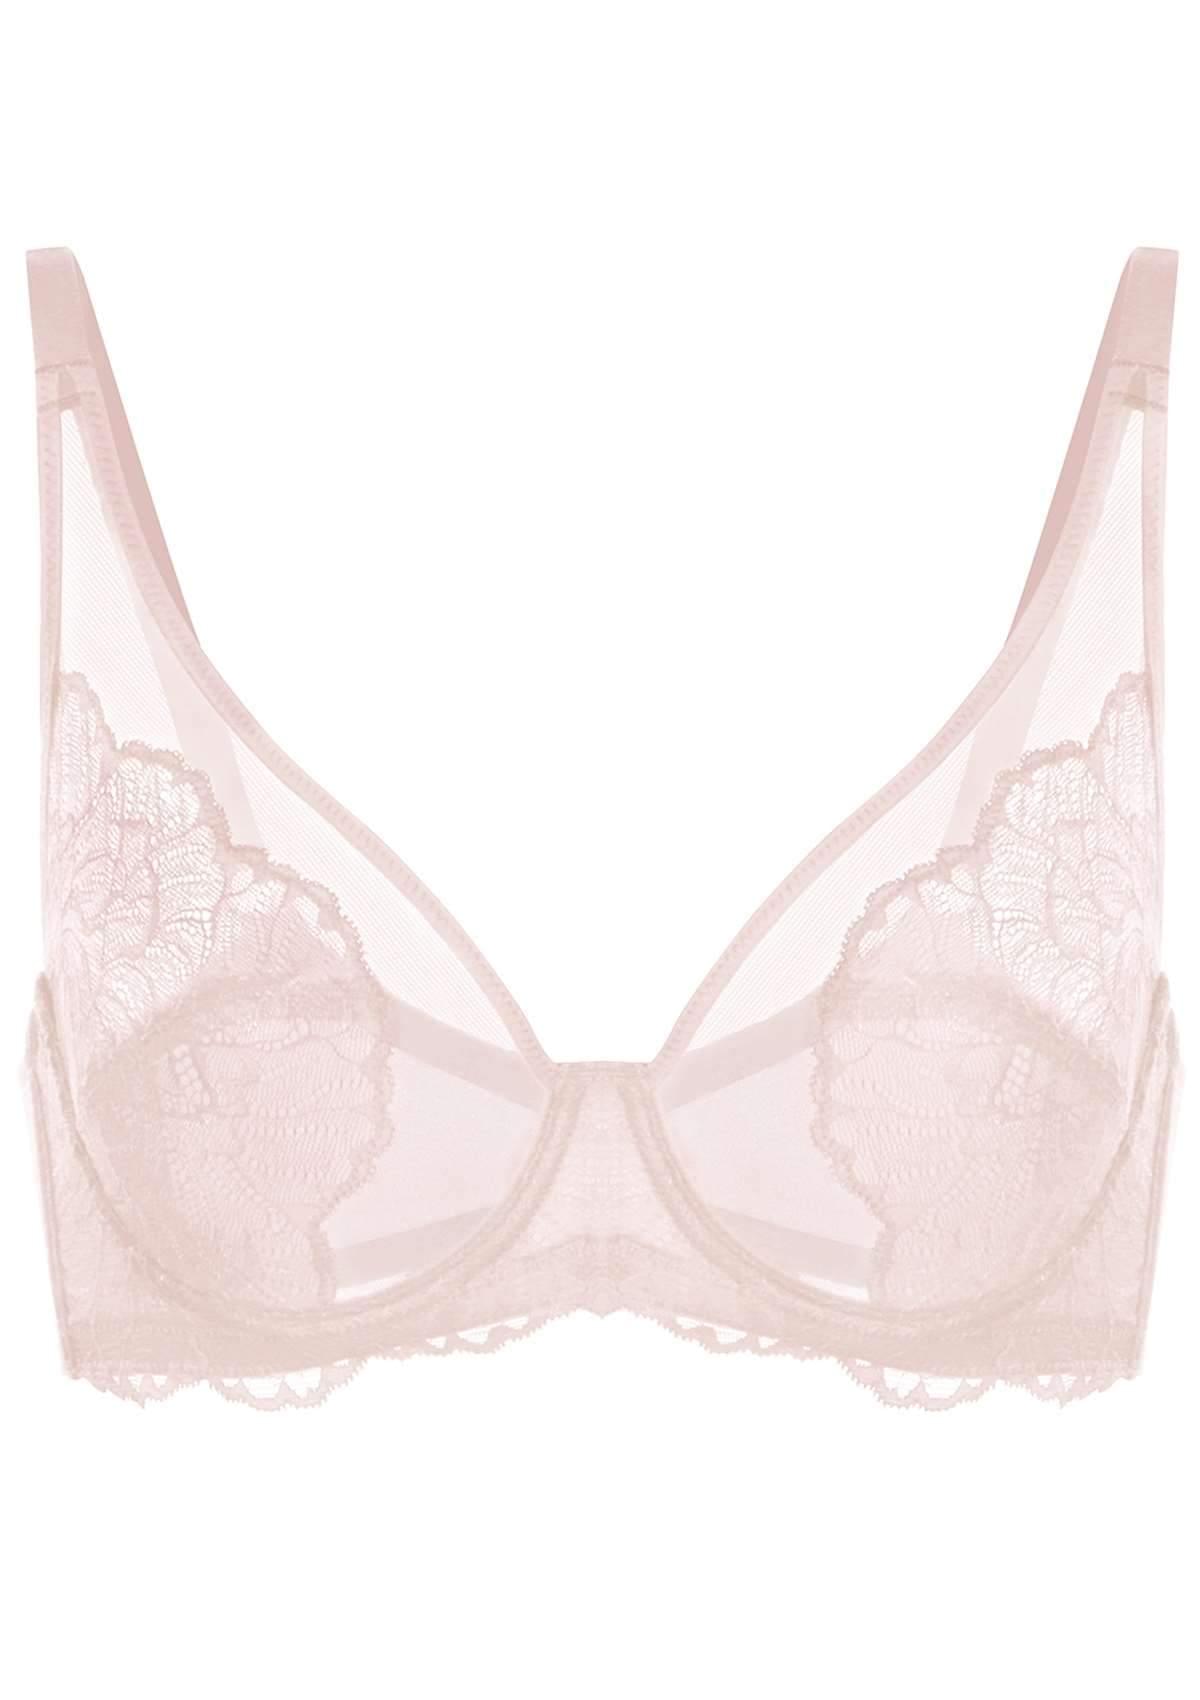 HSIA Blossom Lace Bra And Panties Set: Best Bra For Large Busts - Dark Pink / 40 / H